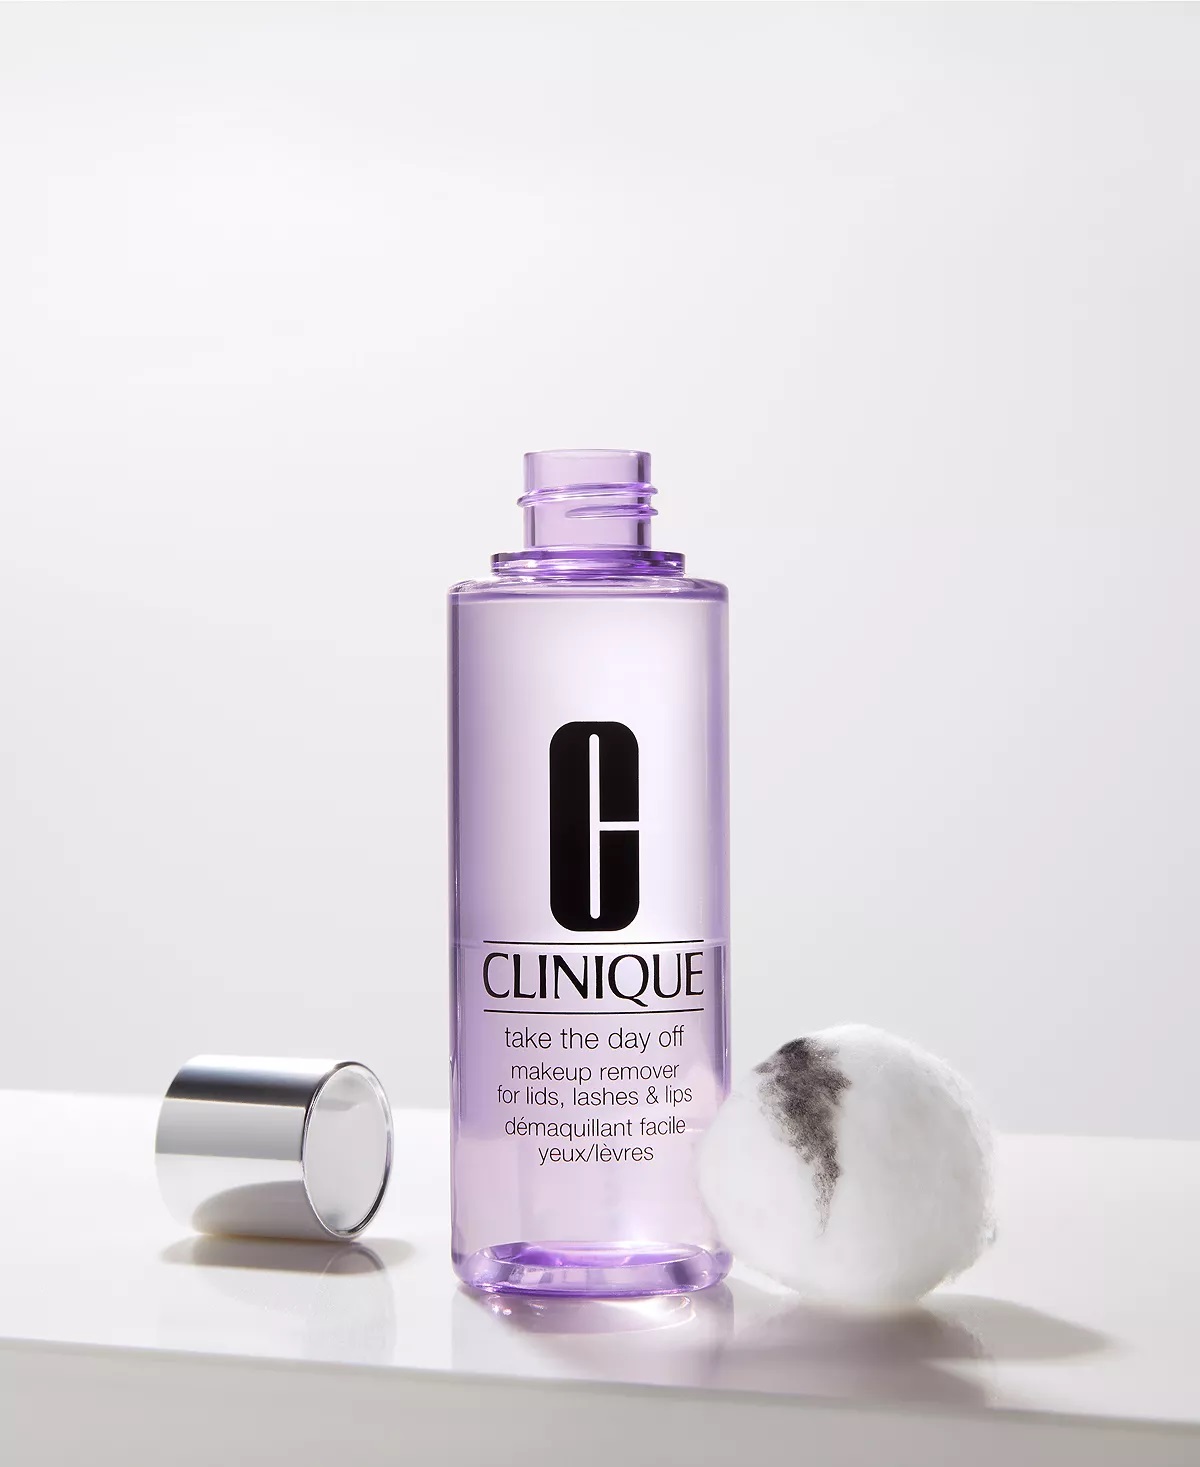 Clinique Jumbo Take The Day Off Makeup Remover For Lids, Lashes & Lips, 6.8 fl. oz.